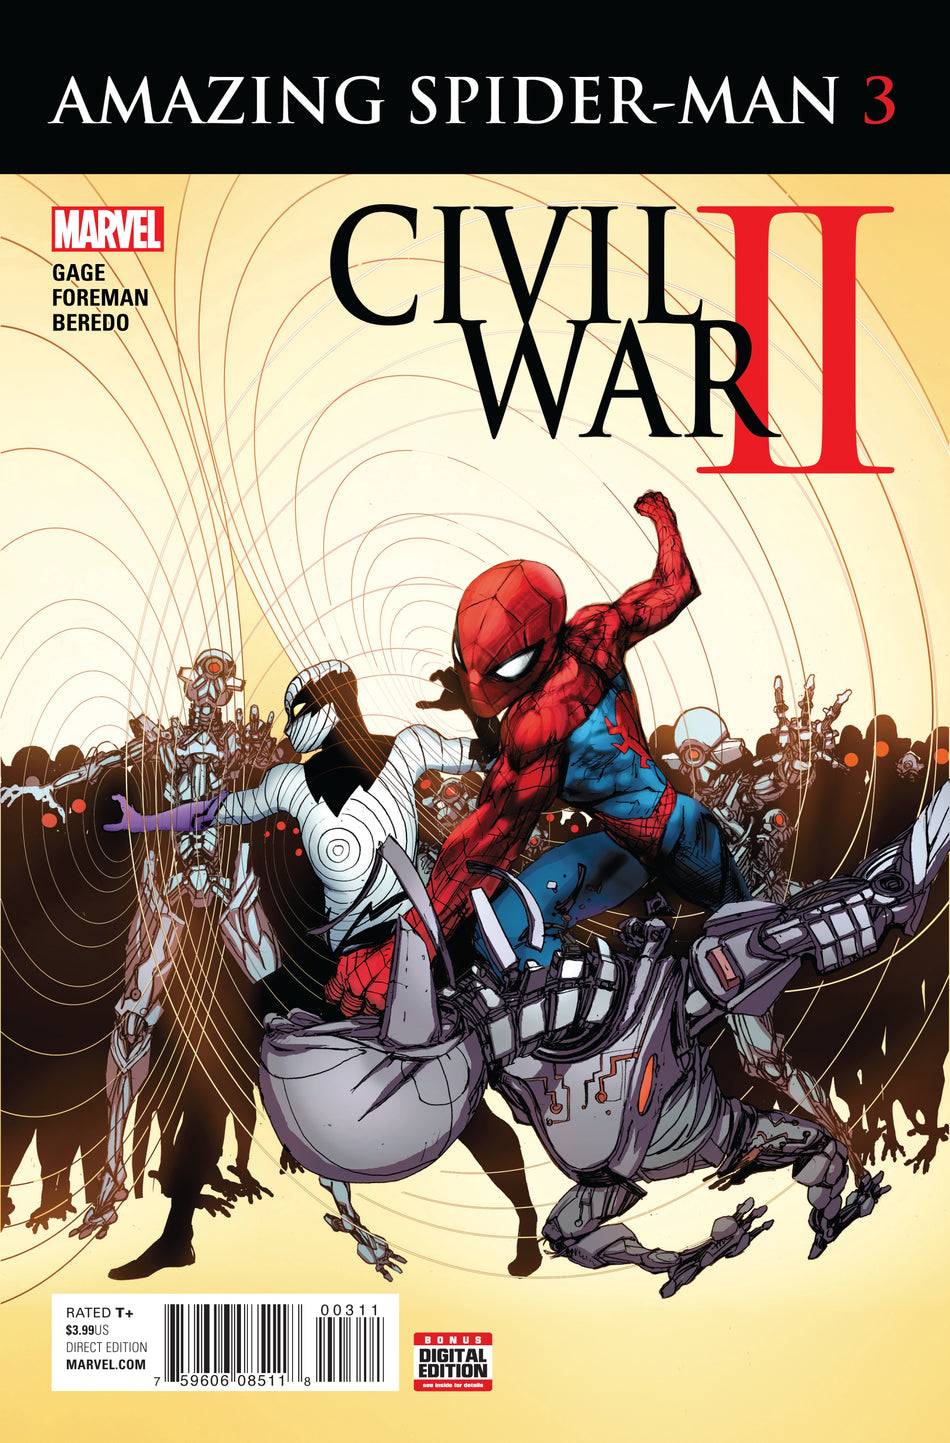 Photo of Civil War Ii Amazing Spider-Man Issue 3 (of 4) comic sold by Stronghold Collectibles